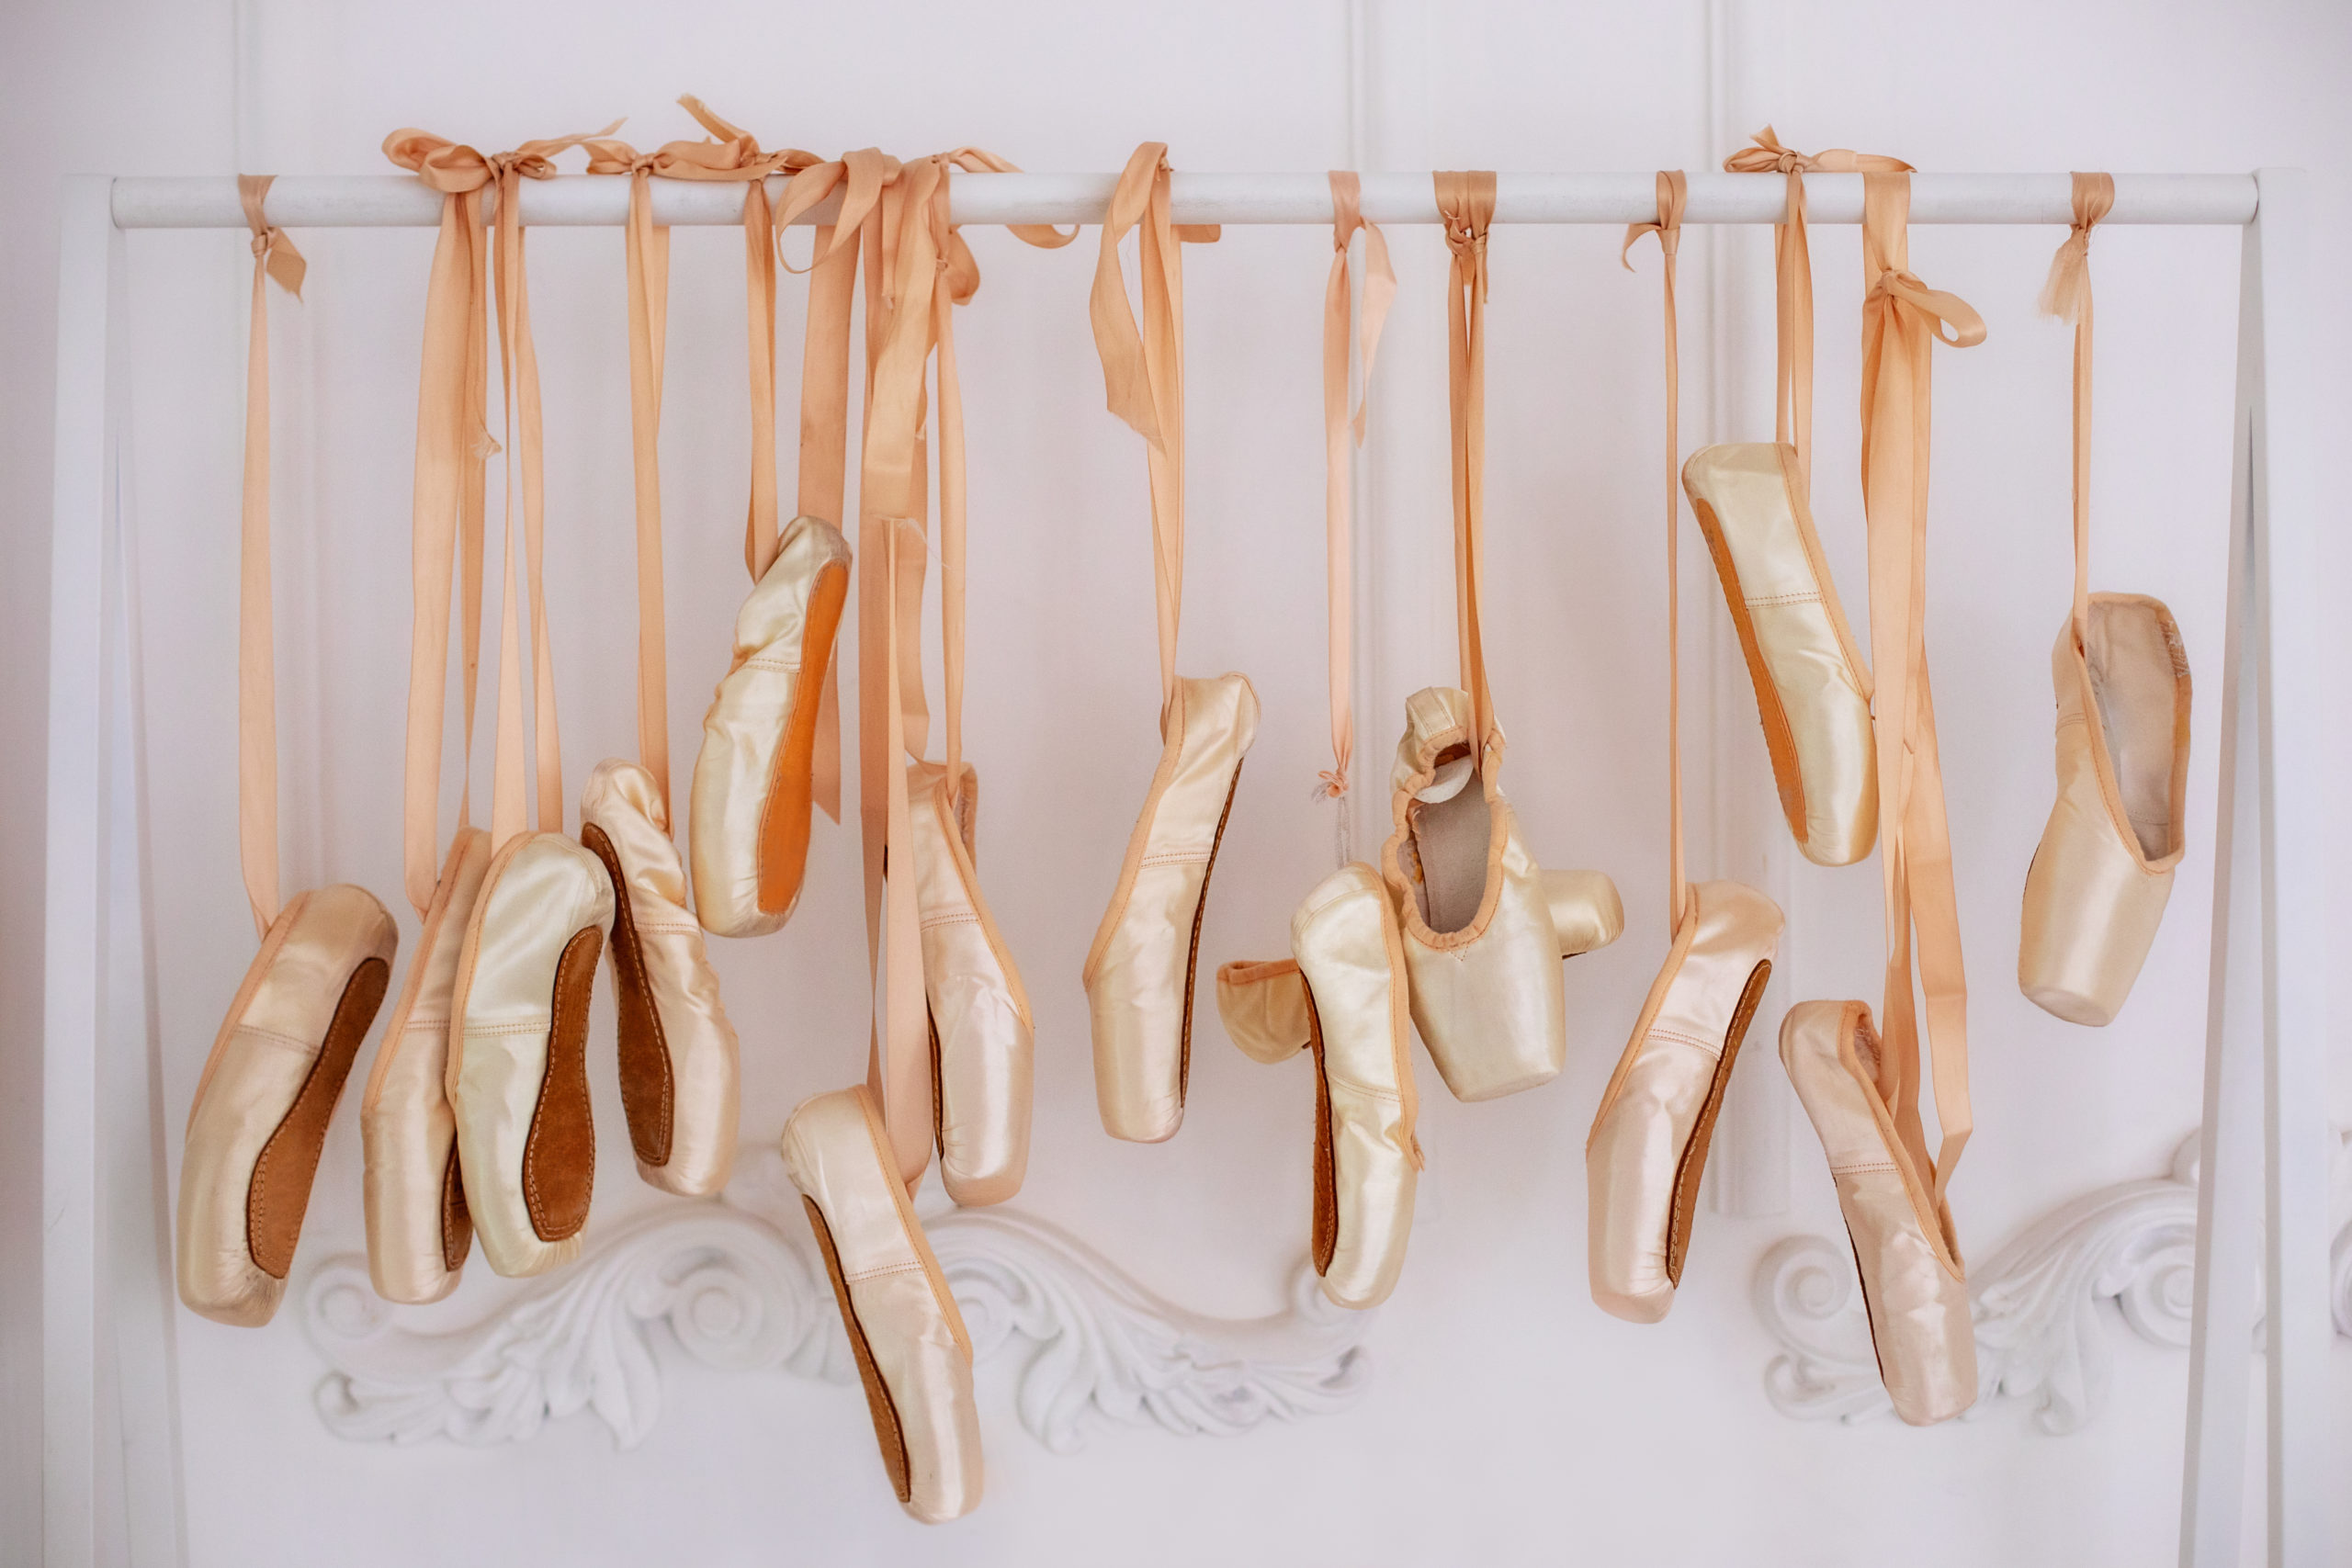 New pointe shoes with satin ribbons hang on a white metal barre.